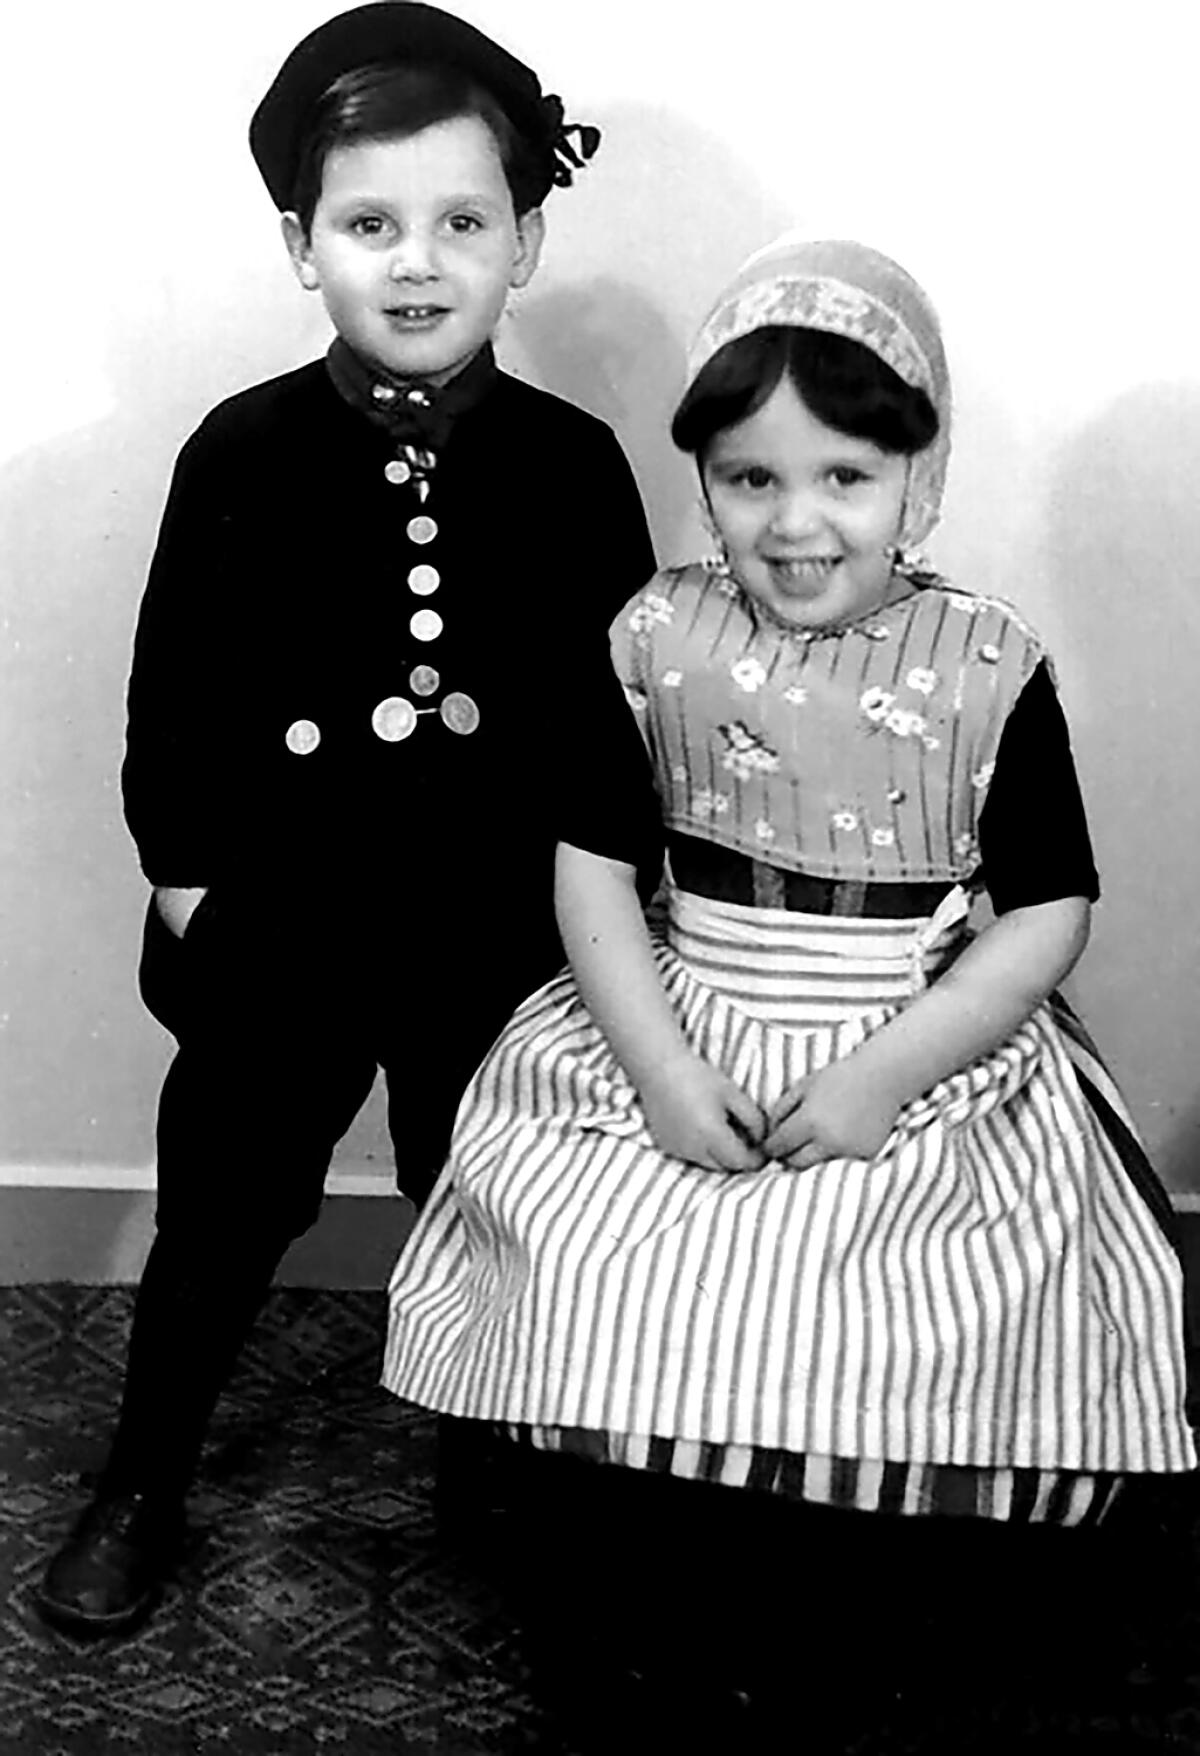 Marion Ein Lewin and her twin brother, Steven Hess, around 6 years old, in Amsterdam.